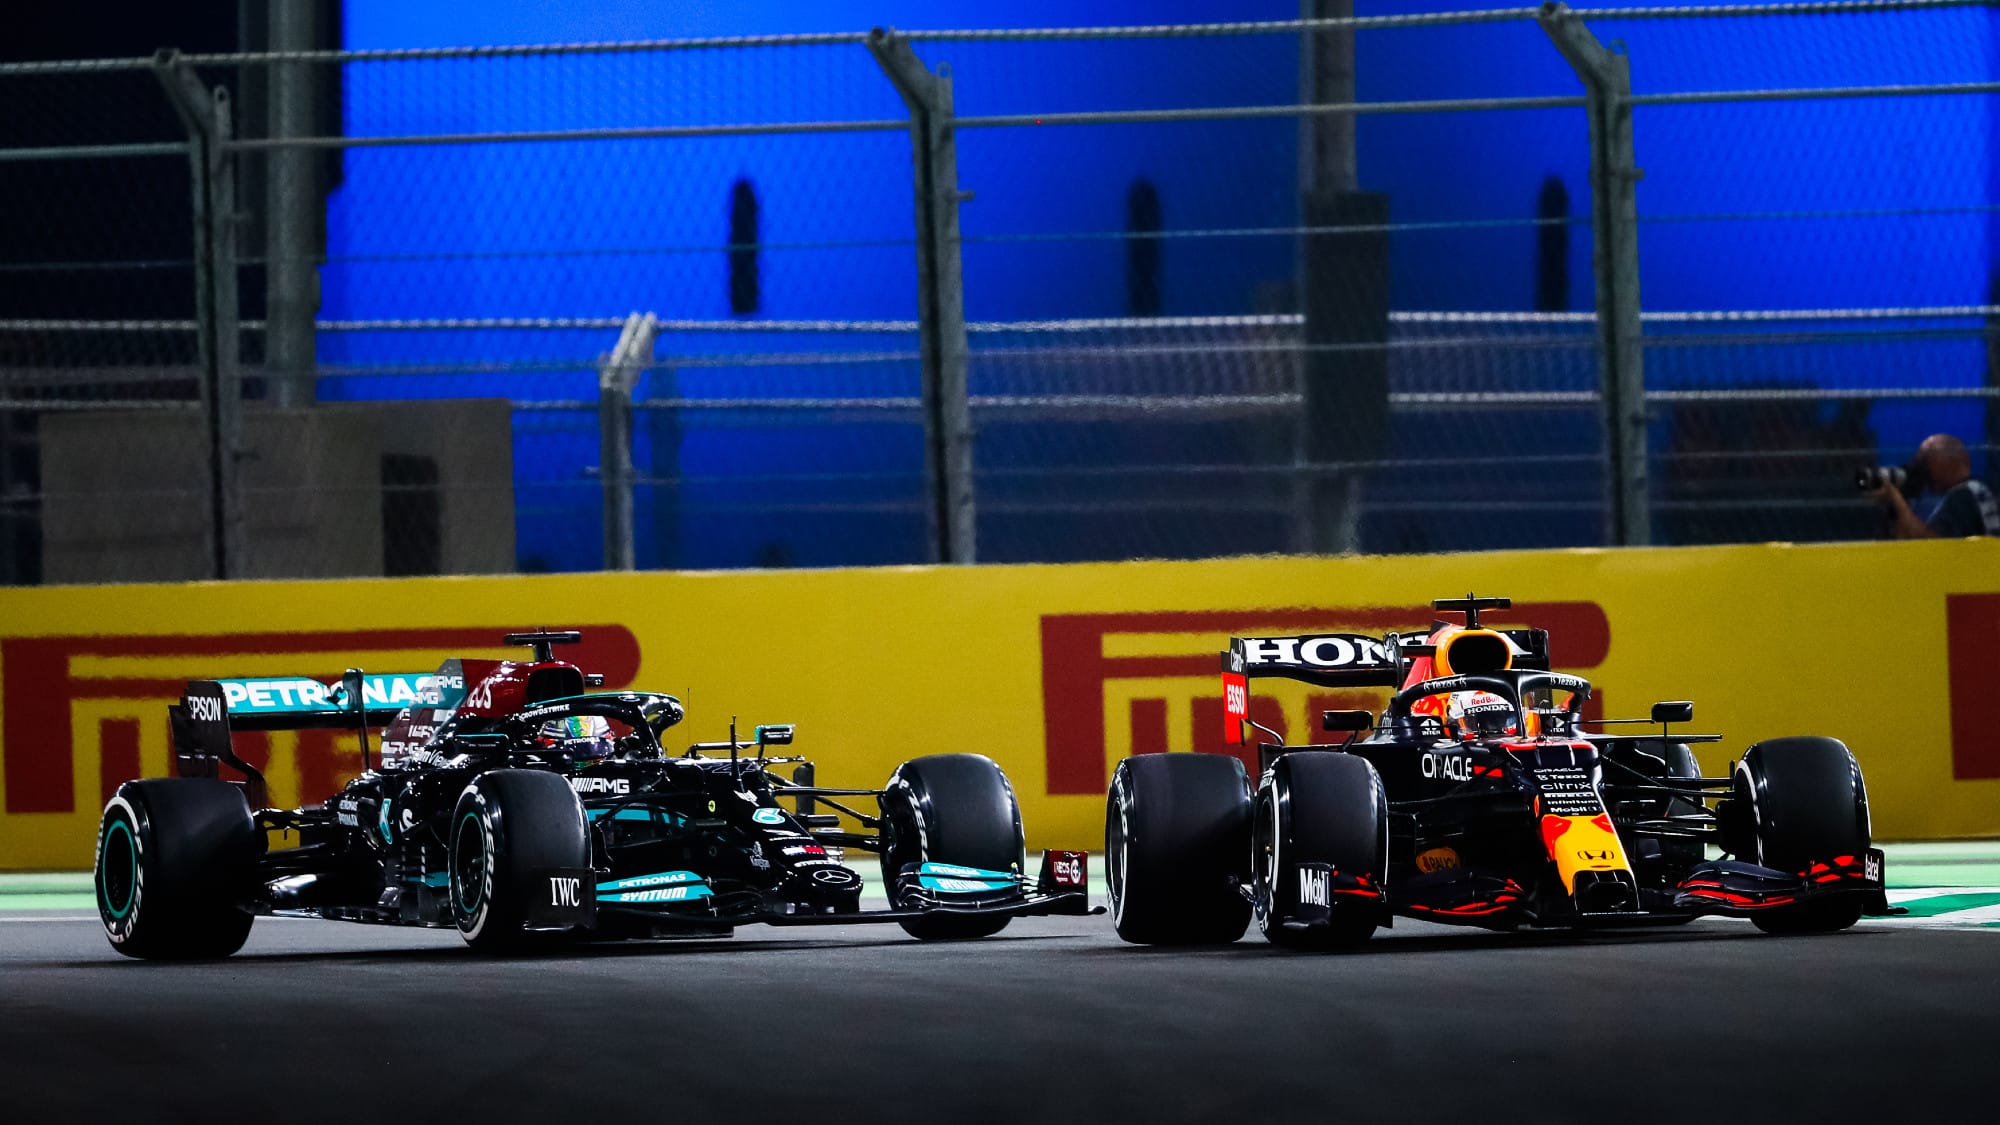 Amazing that Abu Dhabi GP will be shown live on Channel 4, says Hamilton